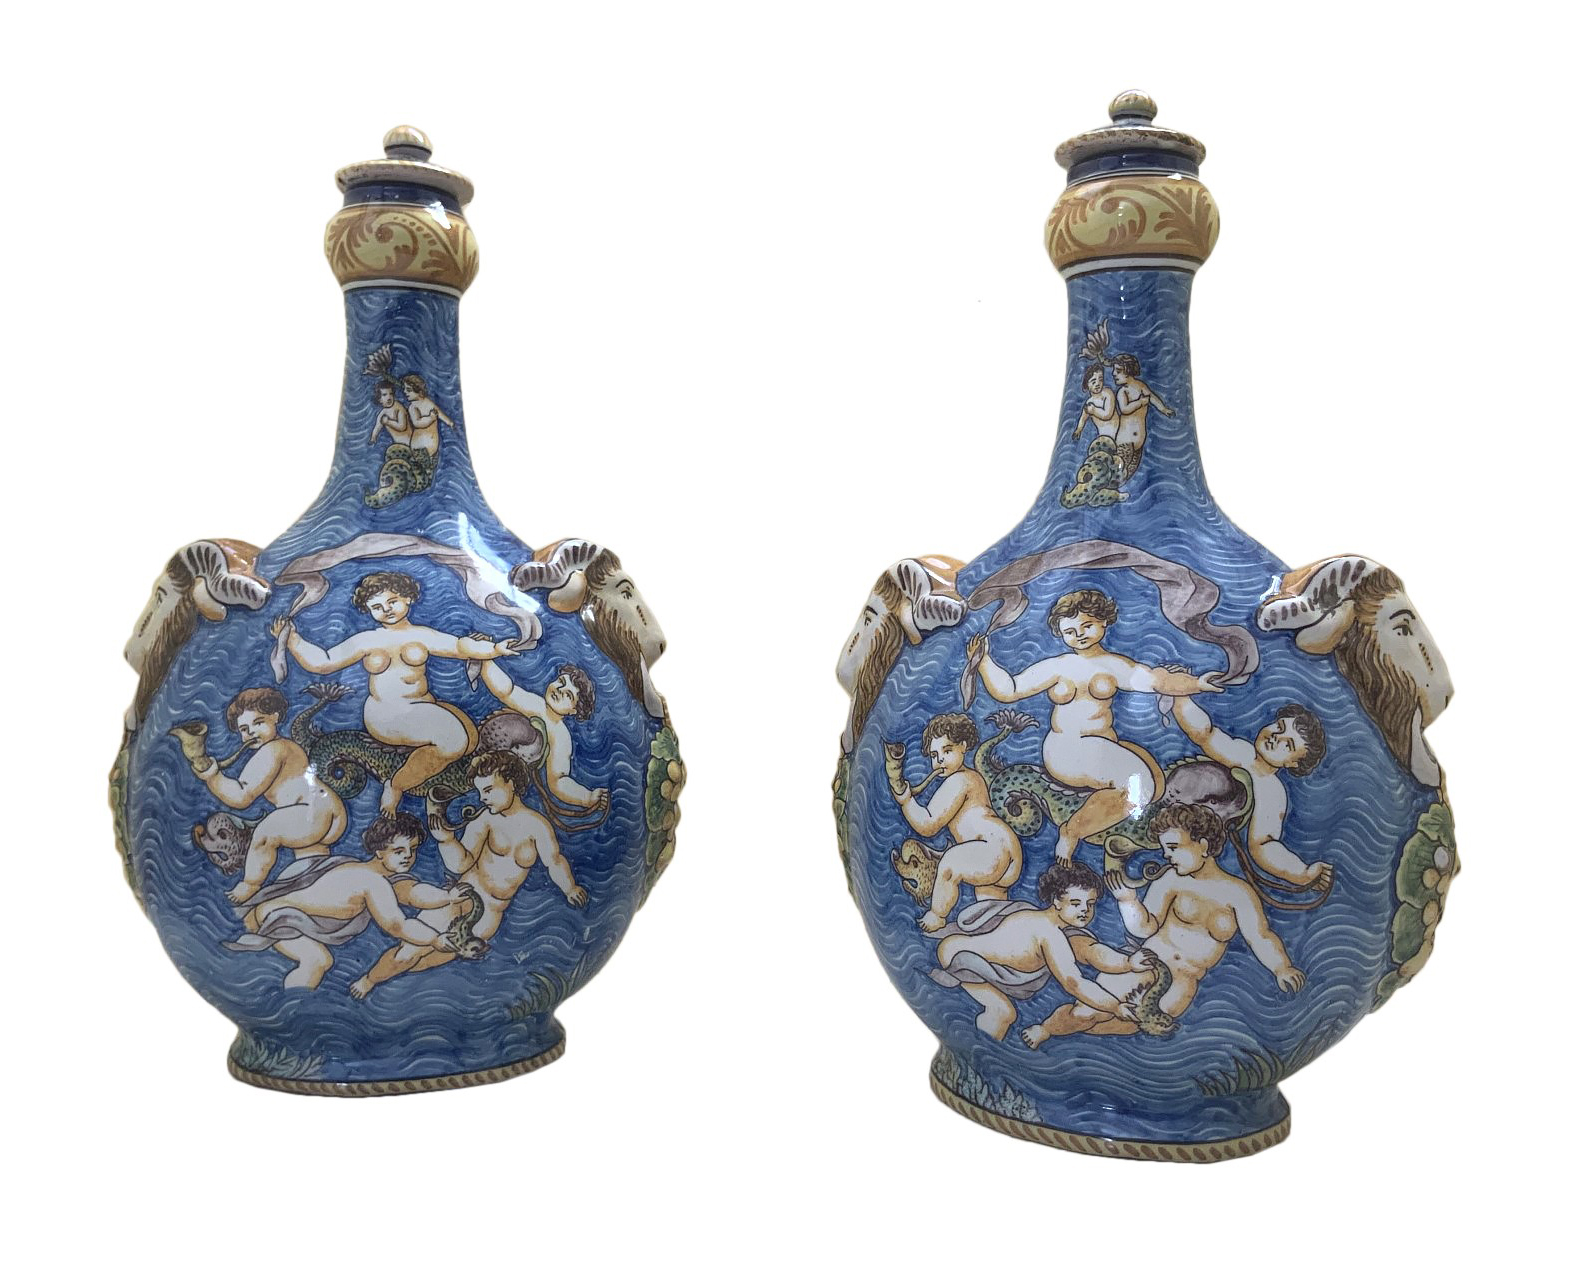 Pair of French, Faience, covered jars (pilgrim flasks)